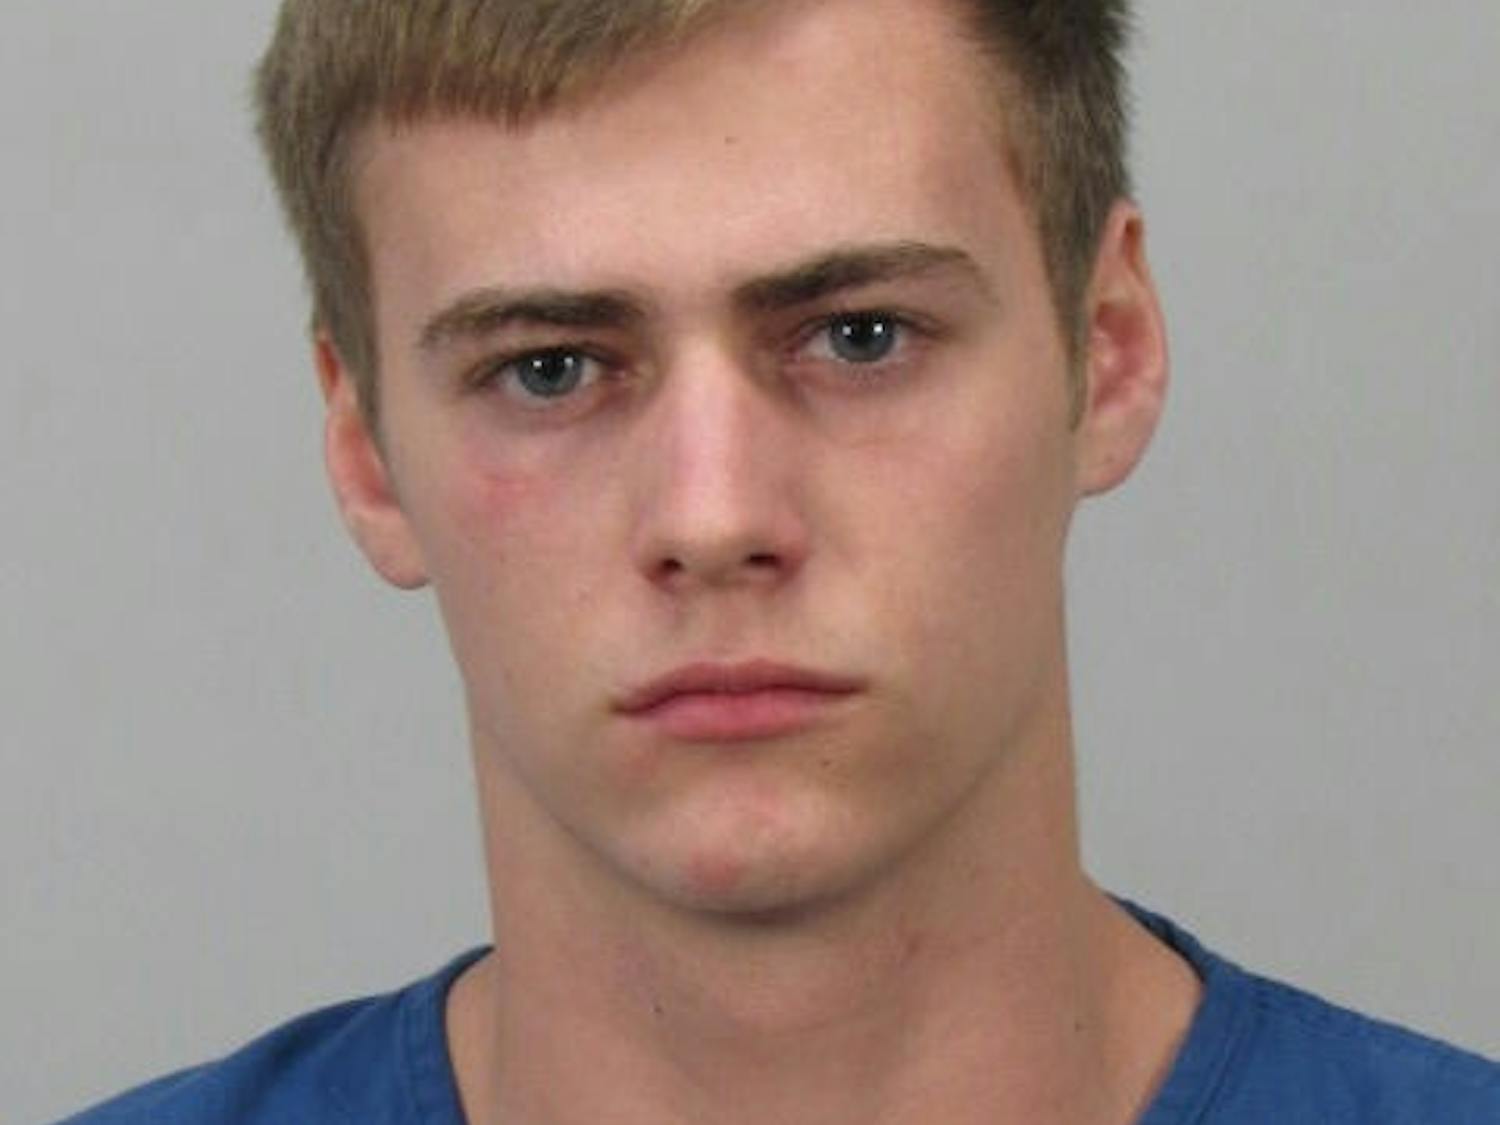 A jury found expelled UW-Madison student Nicholas Ralston, first arrested in 2015, not guilty of third-degree sexual assault Wednesday.&nbsp;